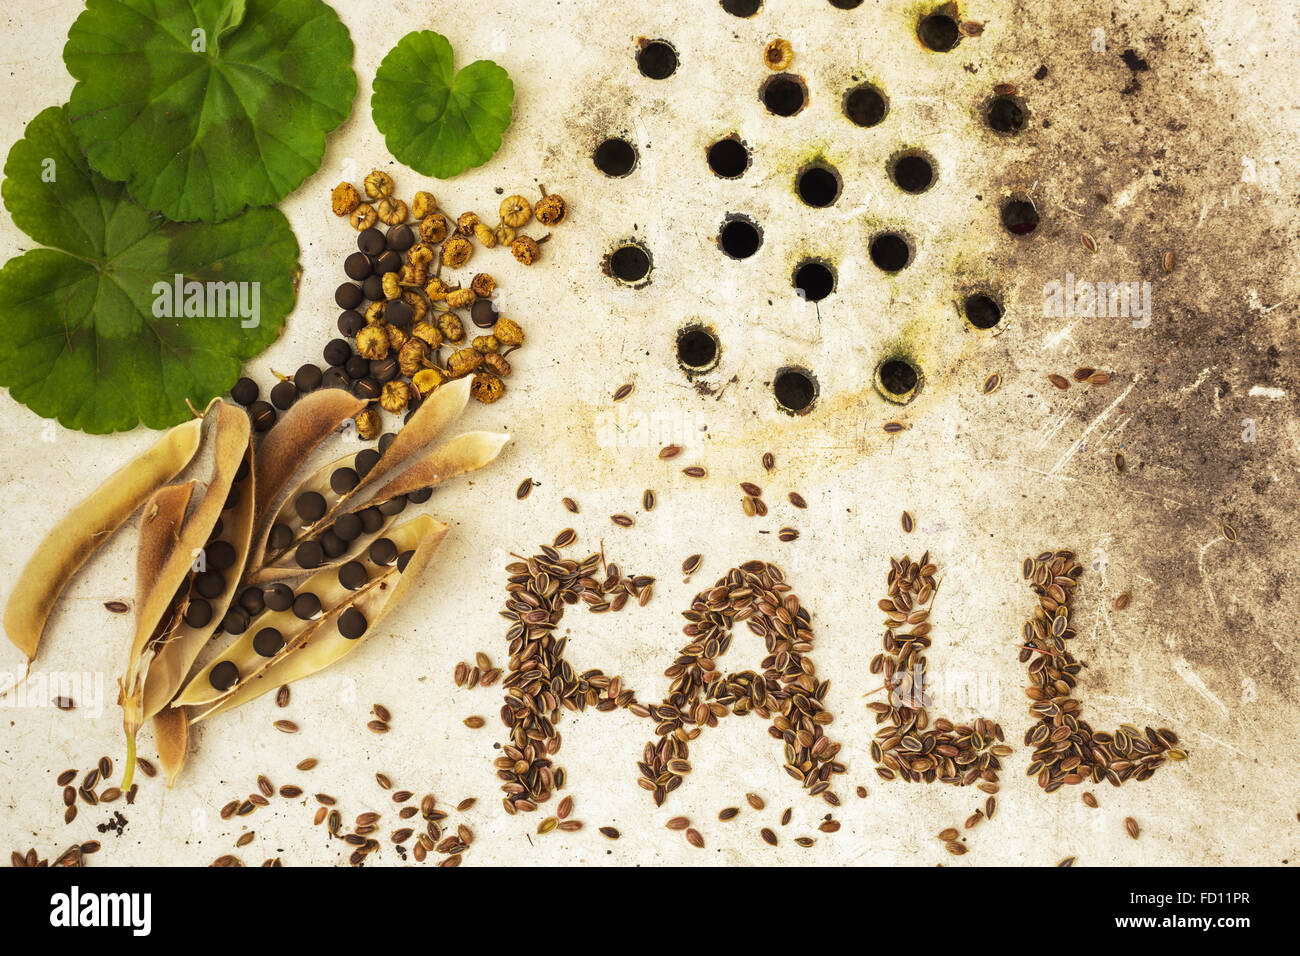 The background with the seeds on the surface of old sink: ecological products Stock Photo